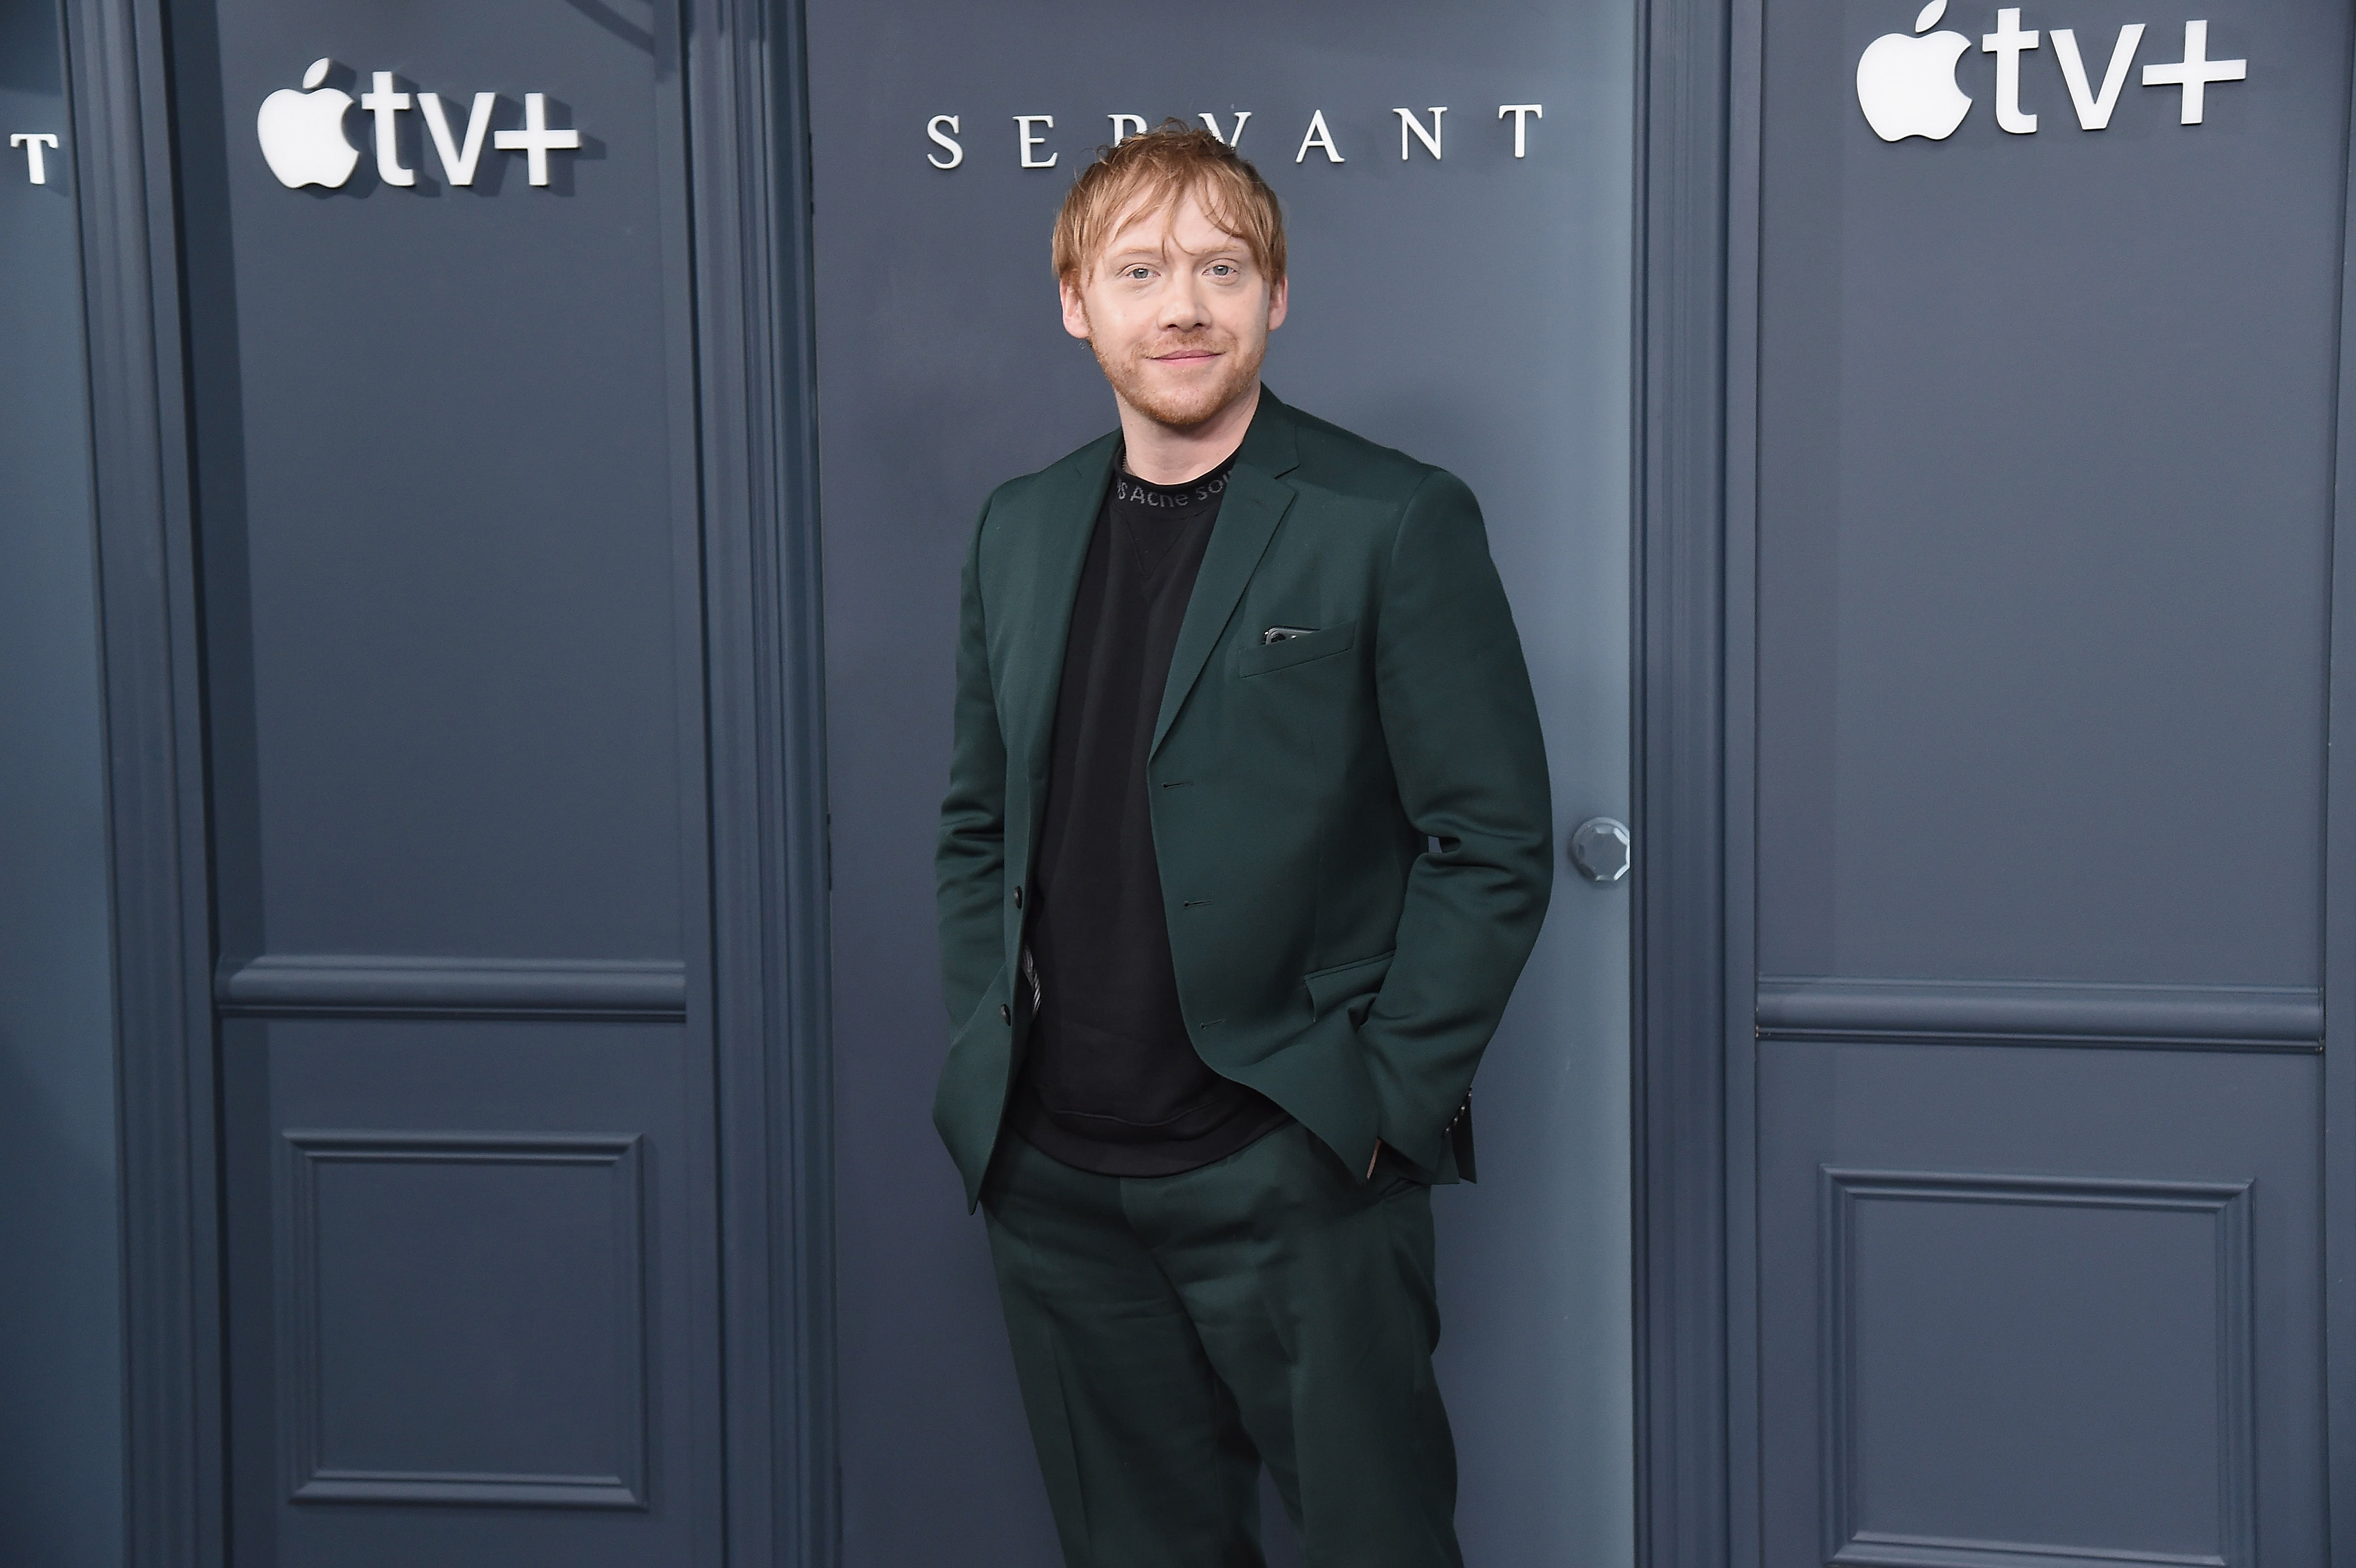 Rupert Grint at the world premiere of "Servant" in New York City on November 19, 2019 | Source: Getty Images